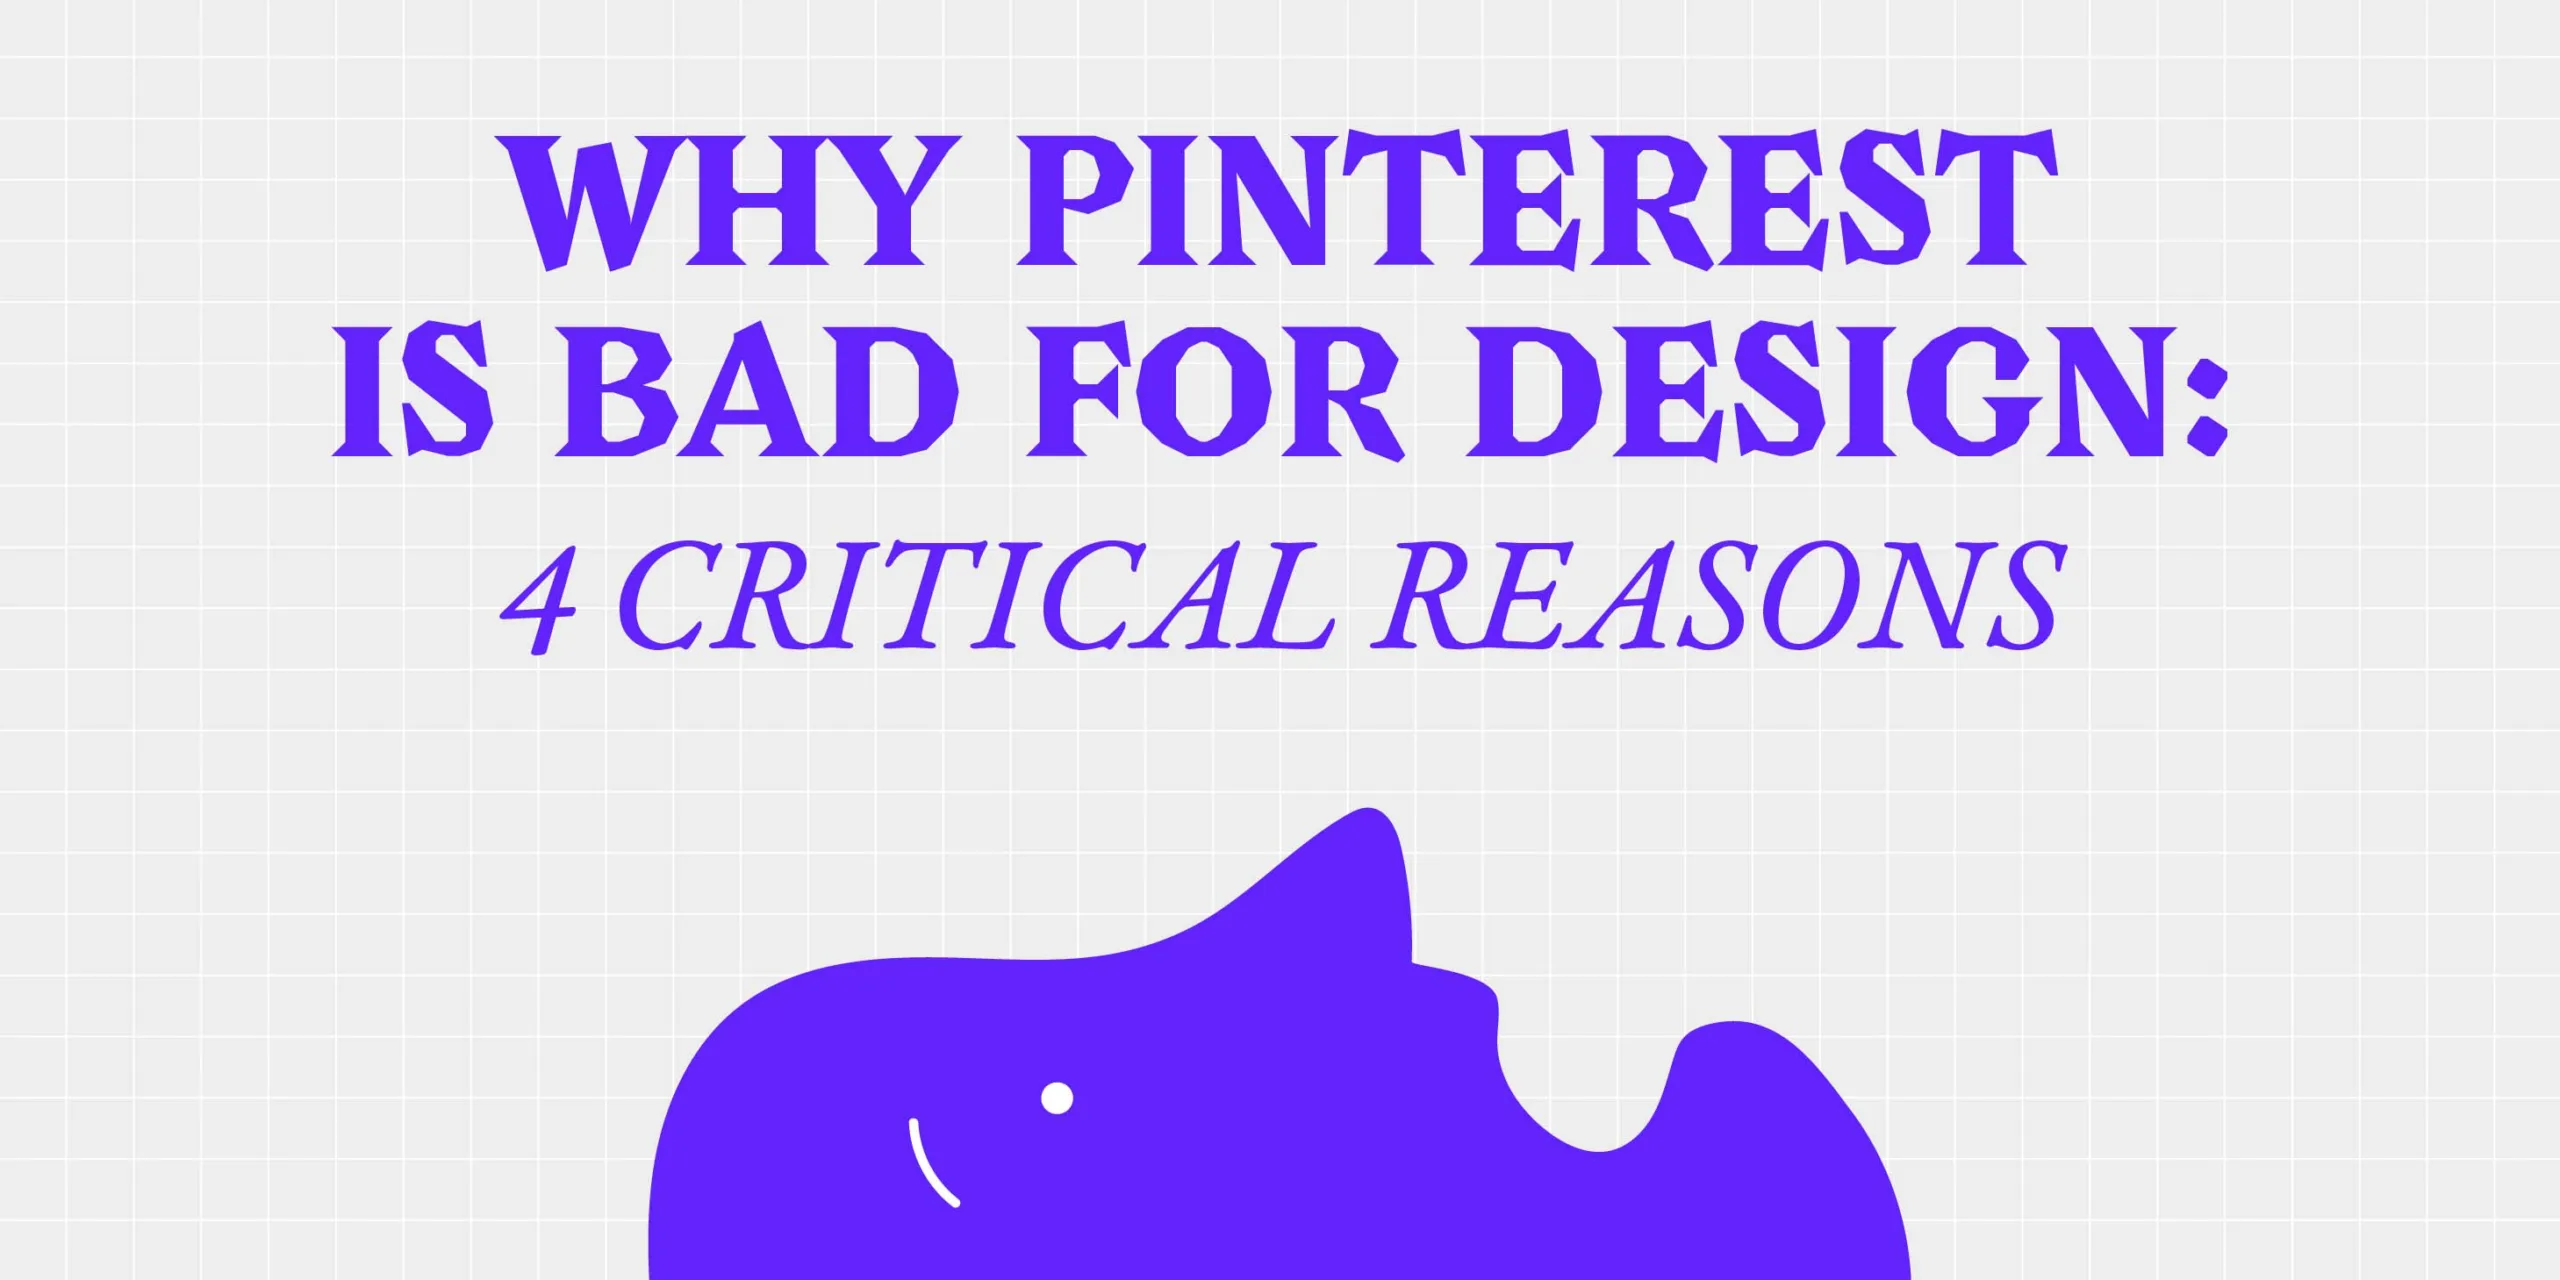 Why Pinterest is Bad for Design: 4 Critical Reasons